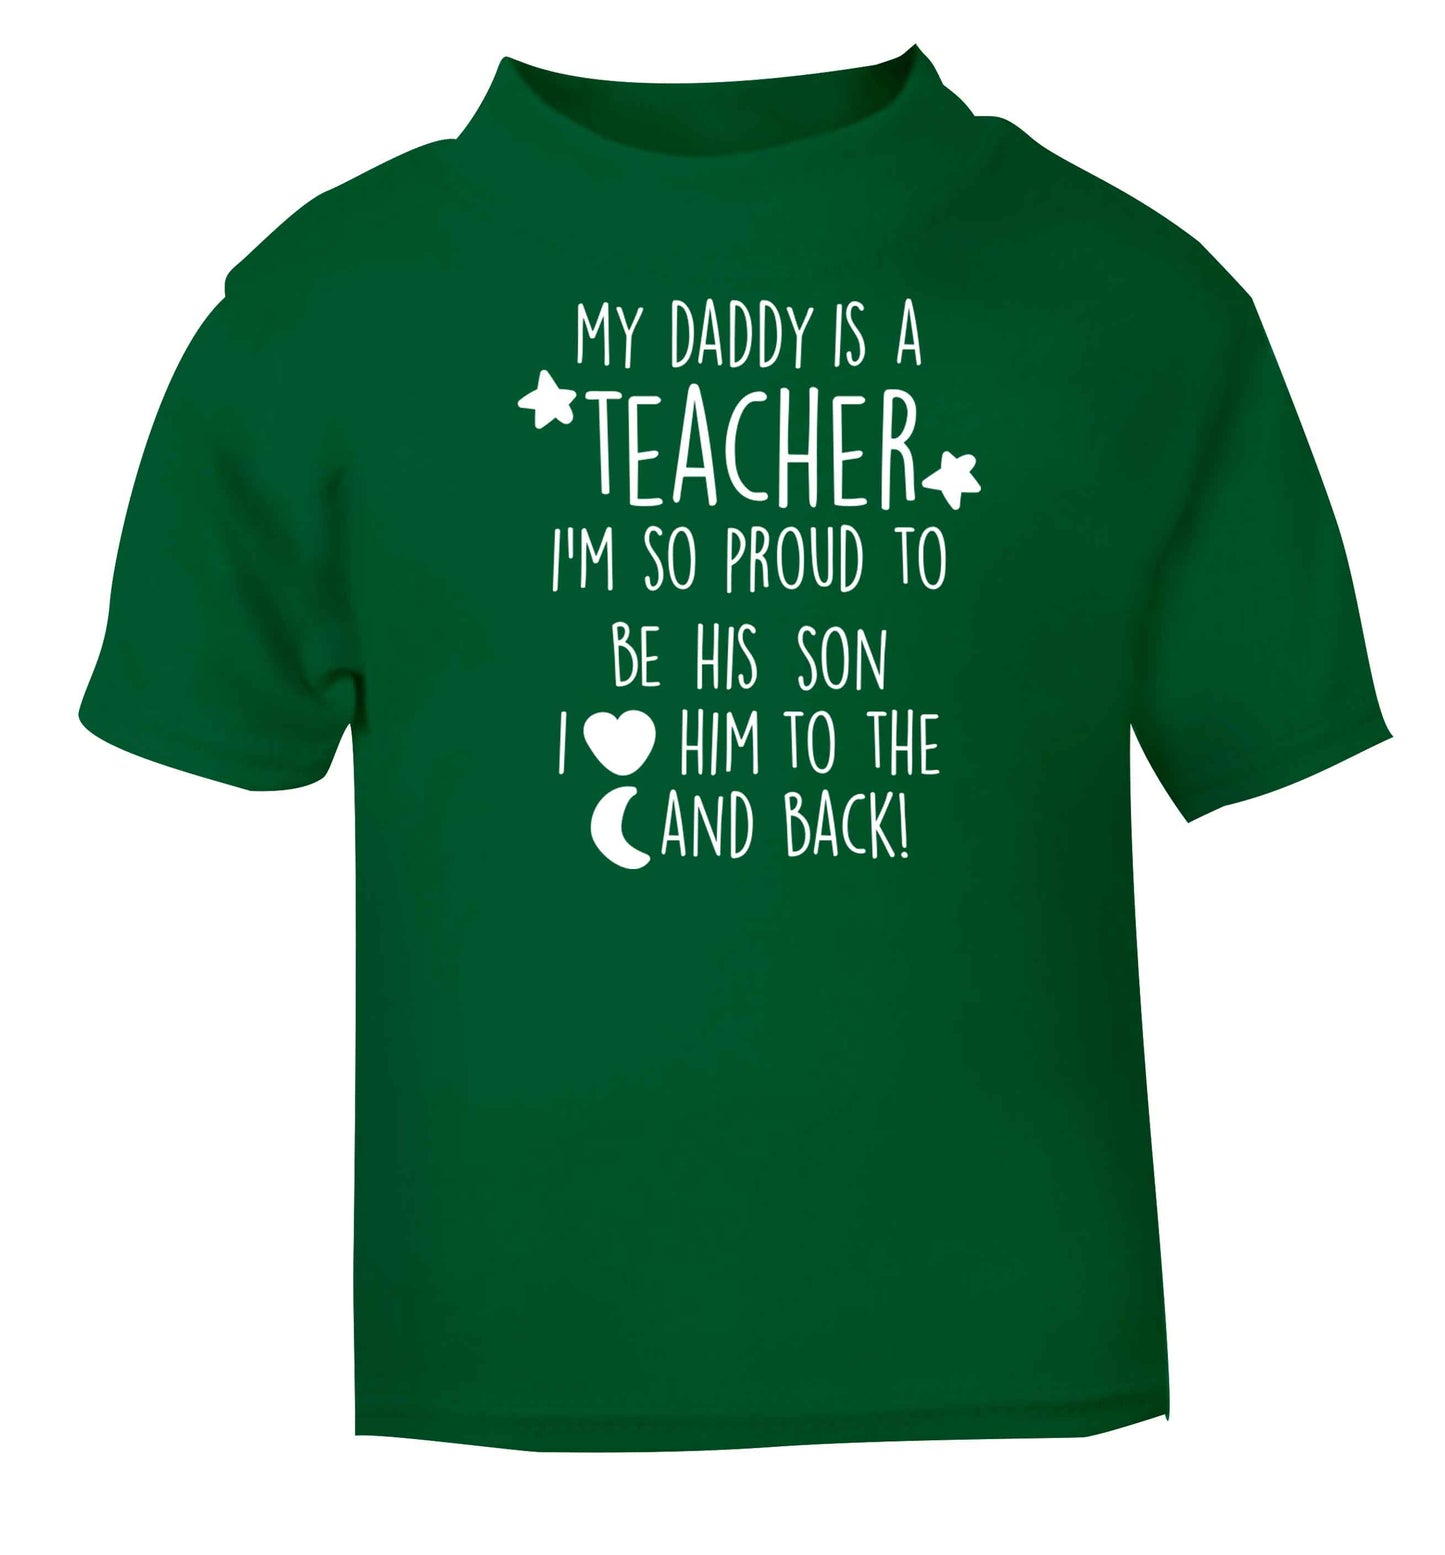 My daddy is a teacher I'm so proud to be his son I love her to the moon and back green baby toddler Tshirt 2 Years